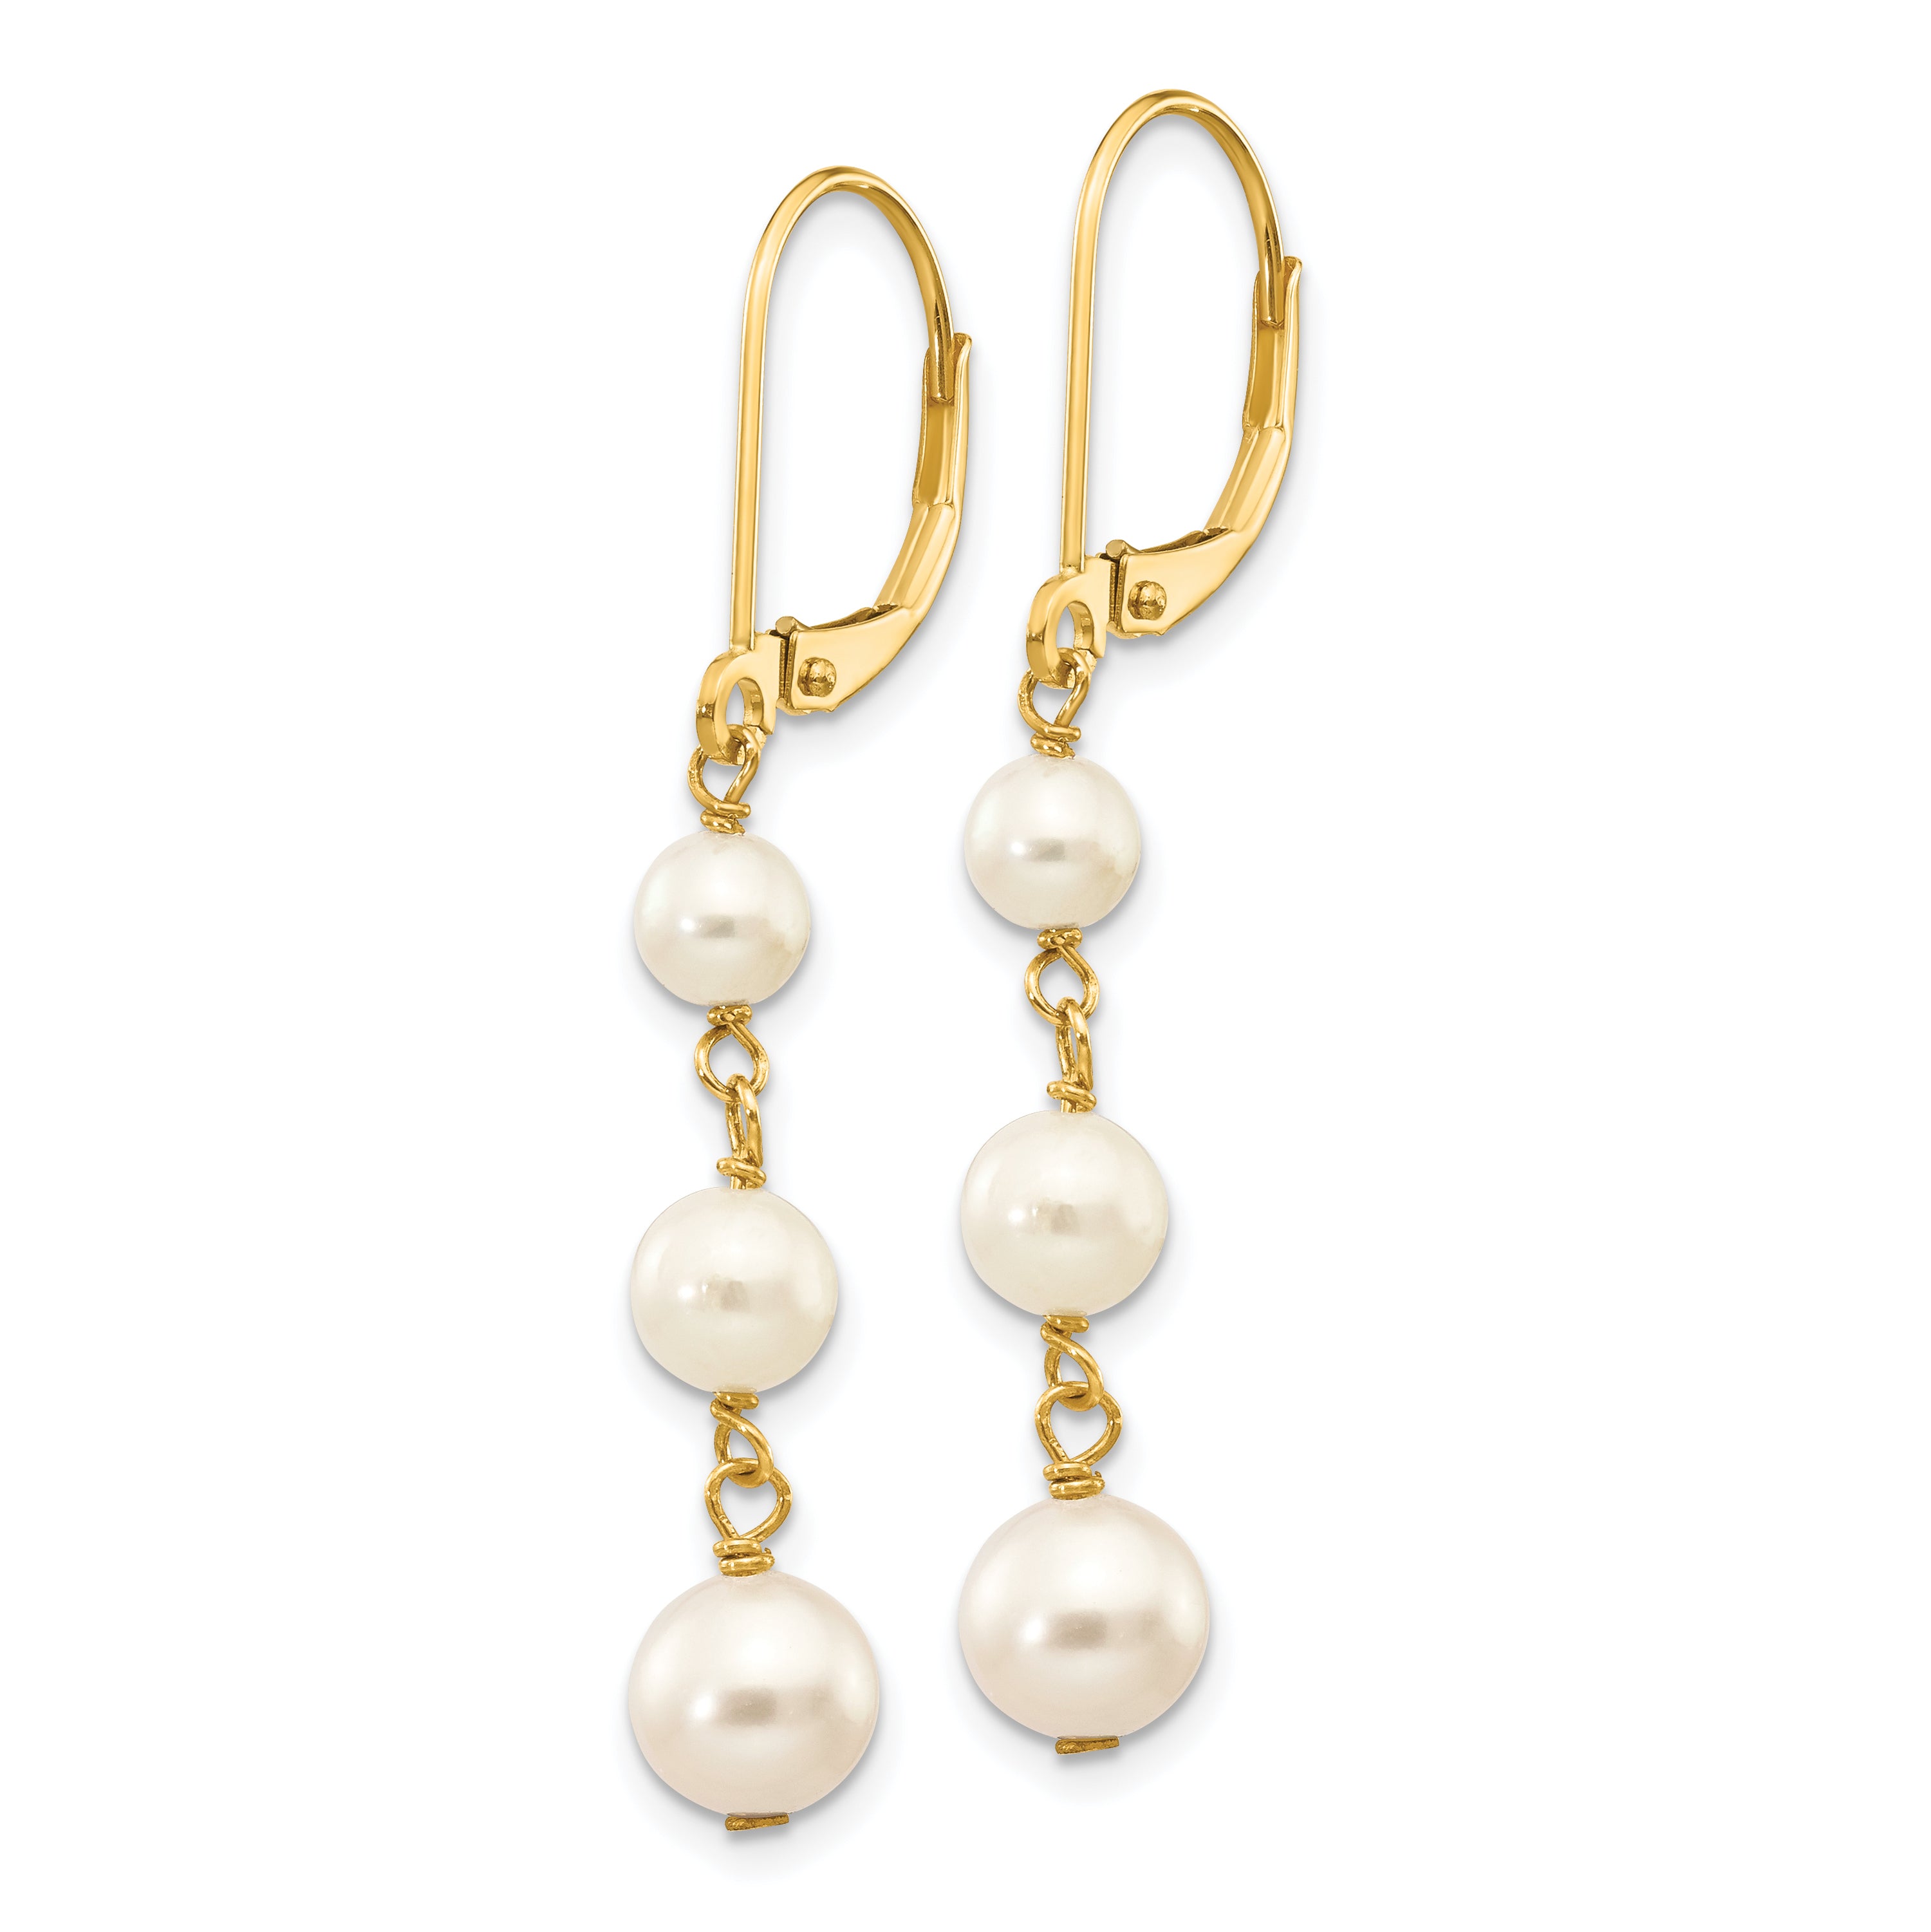 14k 4-6mm White Semi-round FW Cultured Pearl Gaduated Leverback Earrings